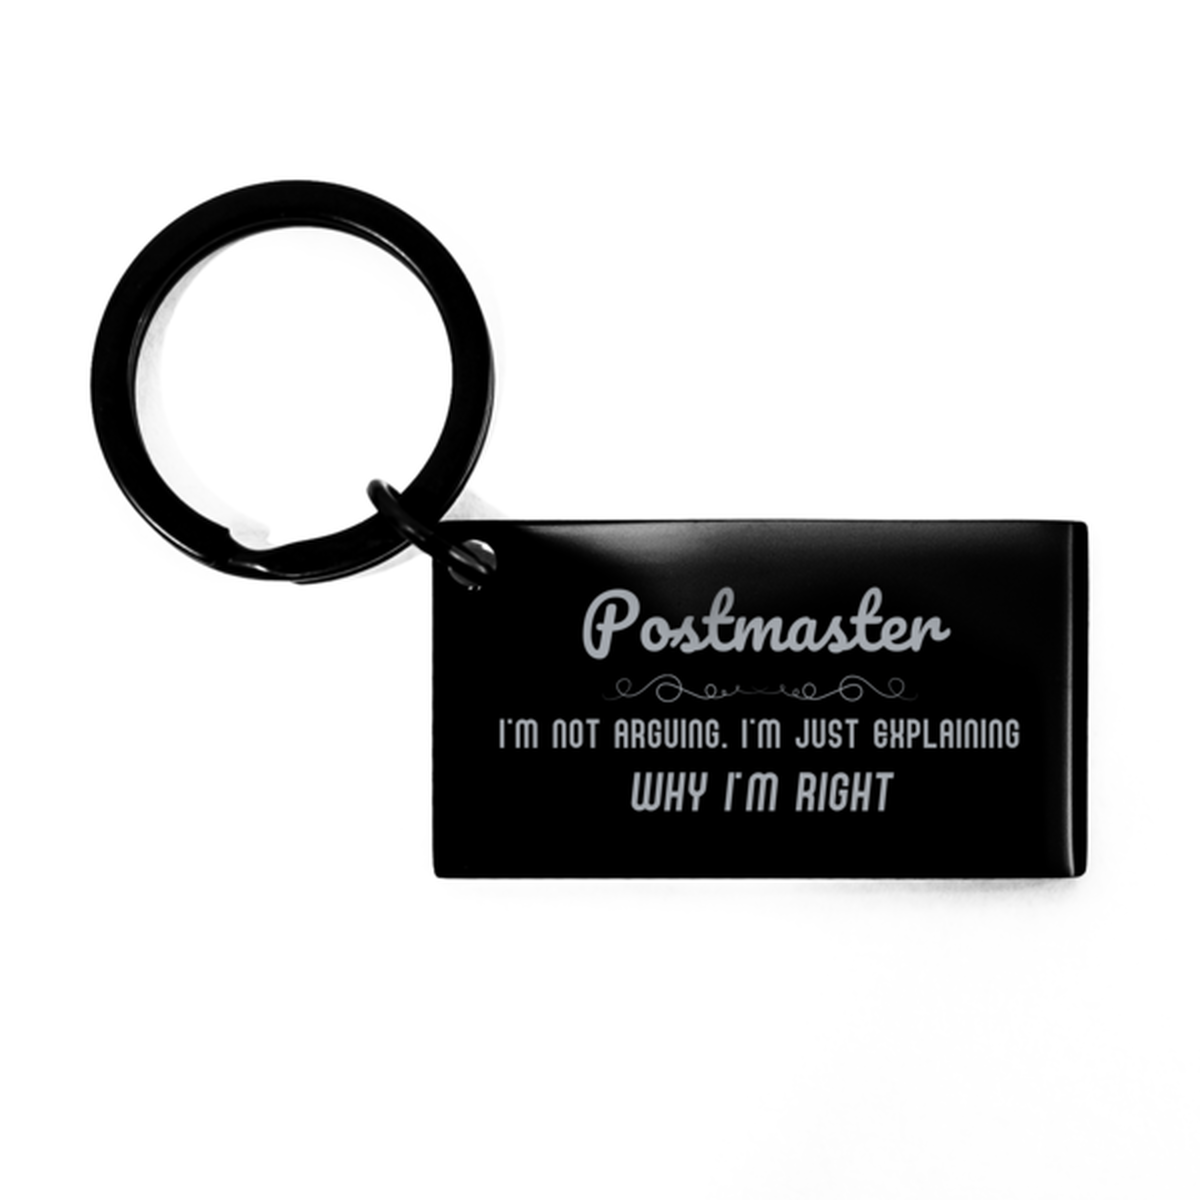 Postmaster I'm not Arguing. I'm Just Explaining Why I'm RIGHT Keychain, Funny Saying Quote Postmaster Gifts For Postmaster Graduation Birthday Christmas Gifts for Men Women Coworker